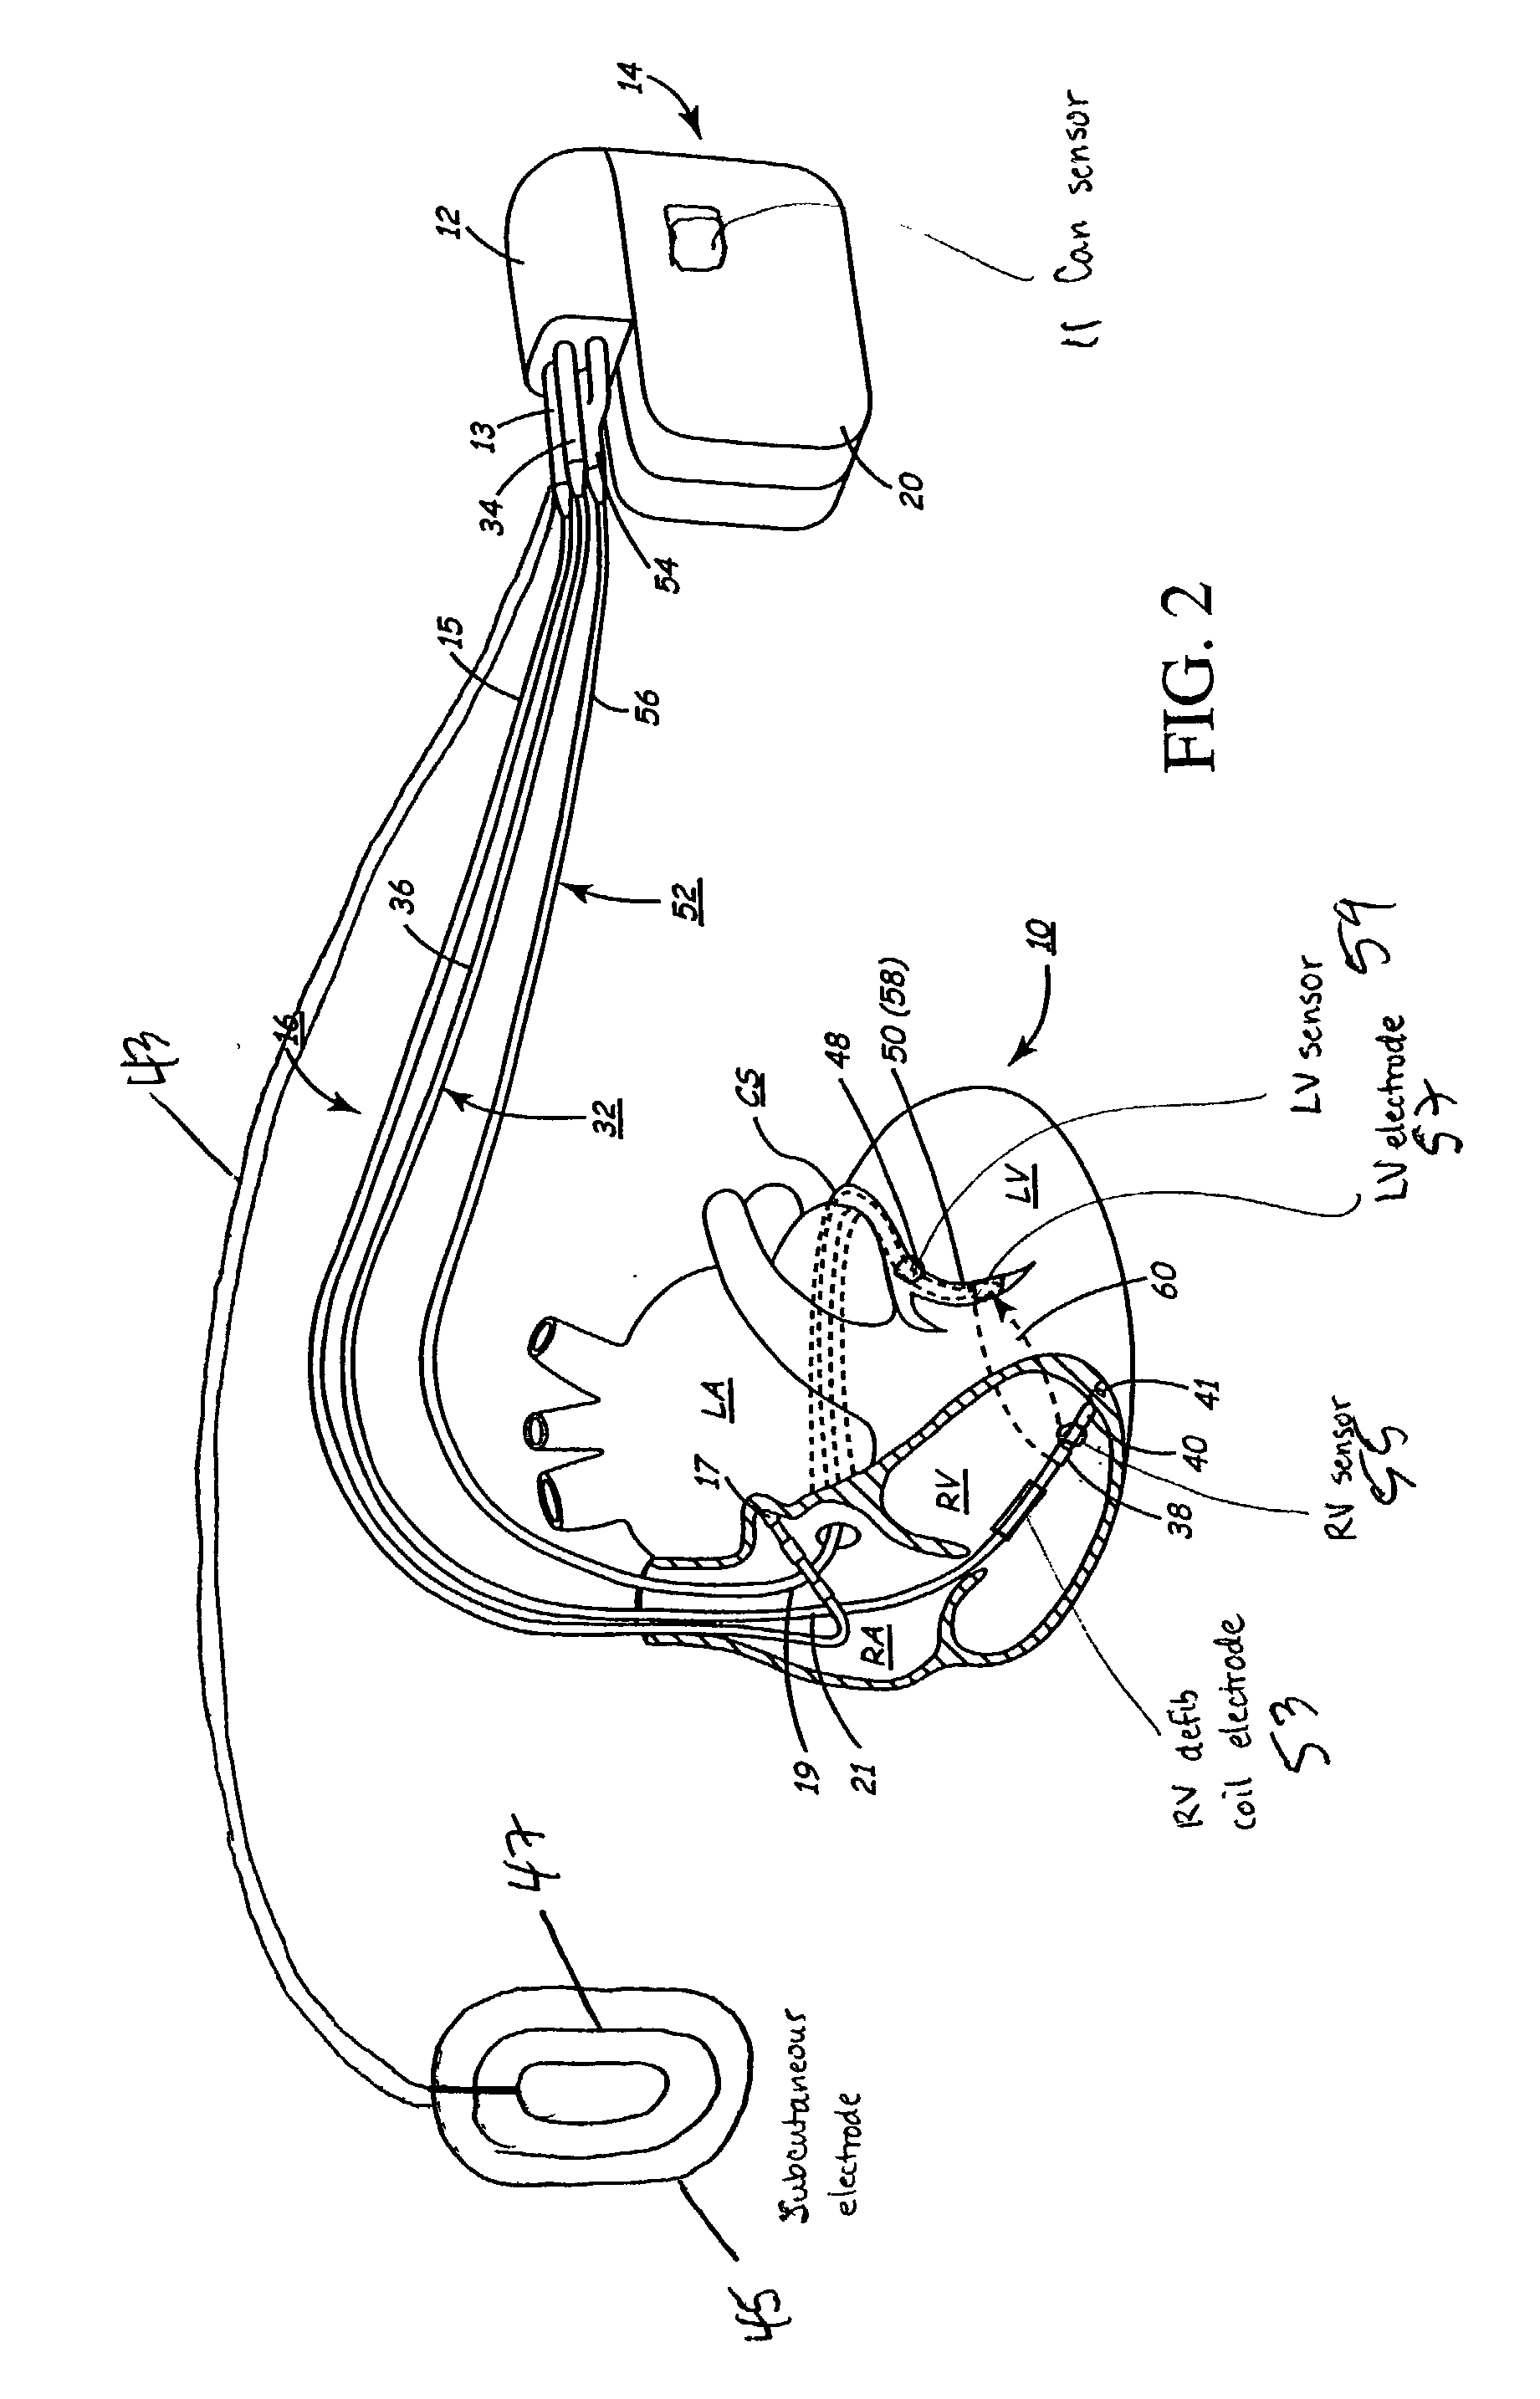 Implantable medical device for treating cardiac mechanical dysfunction by electrical stimulation